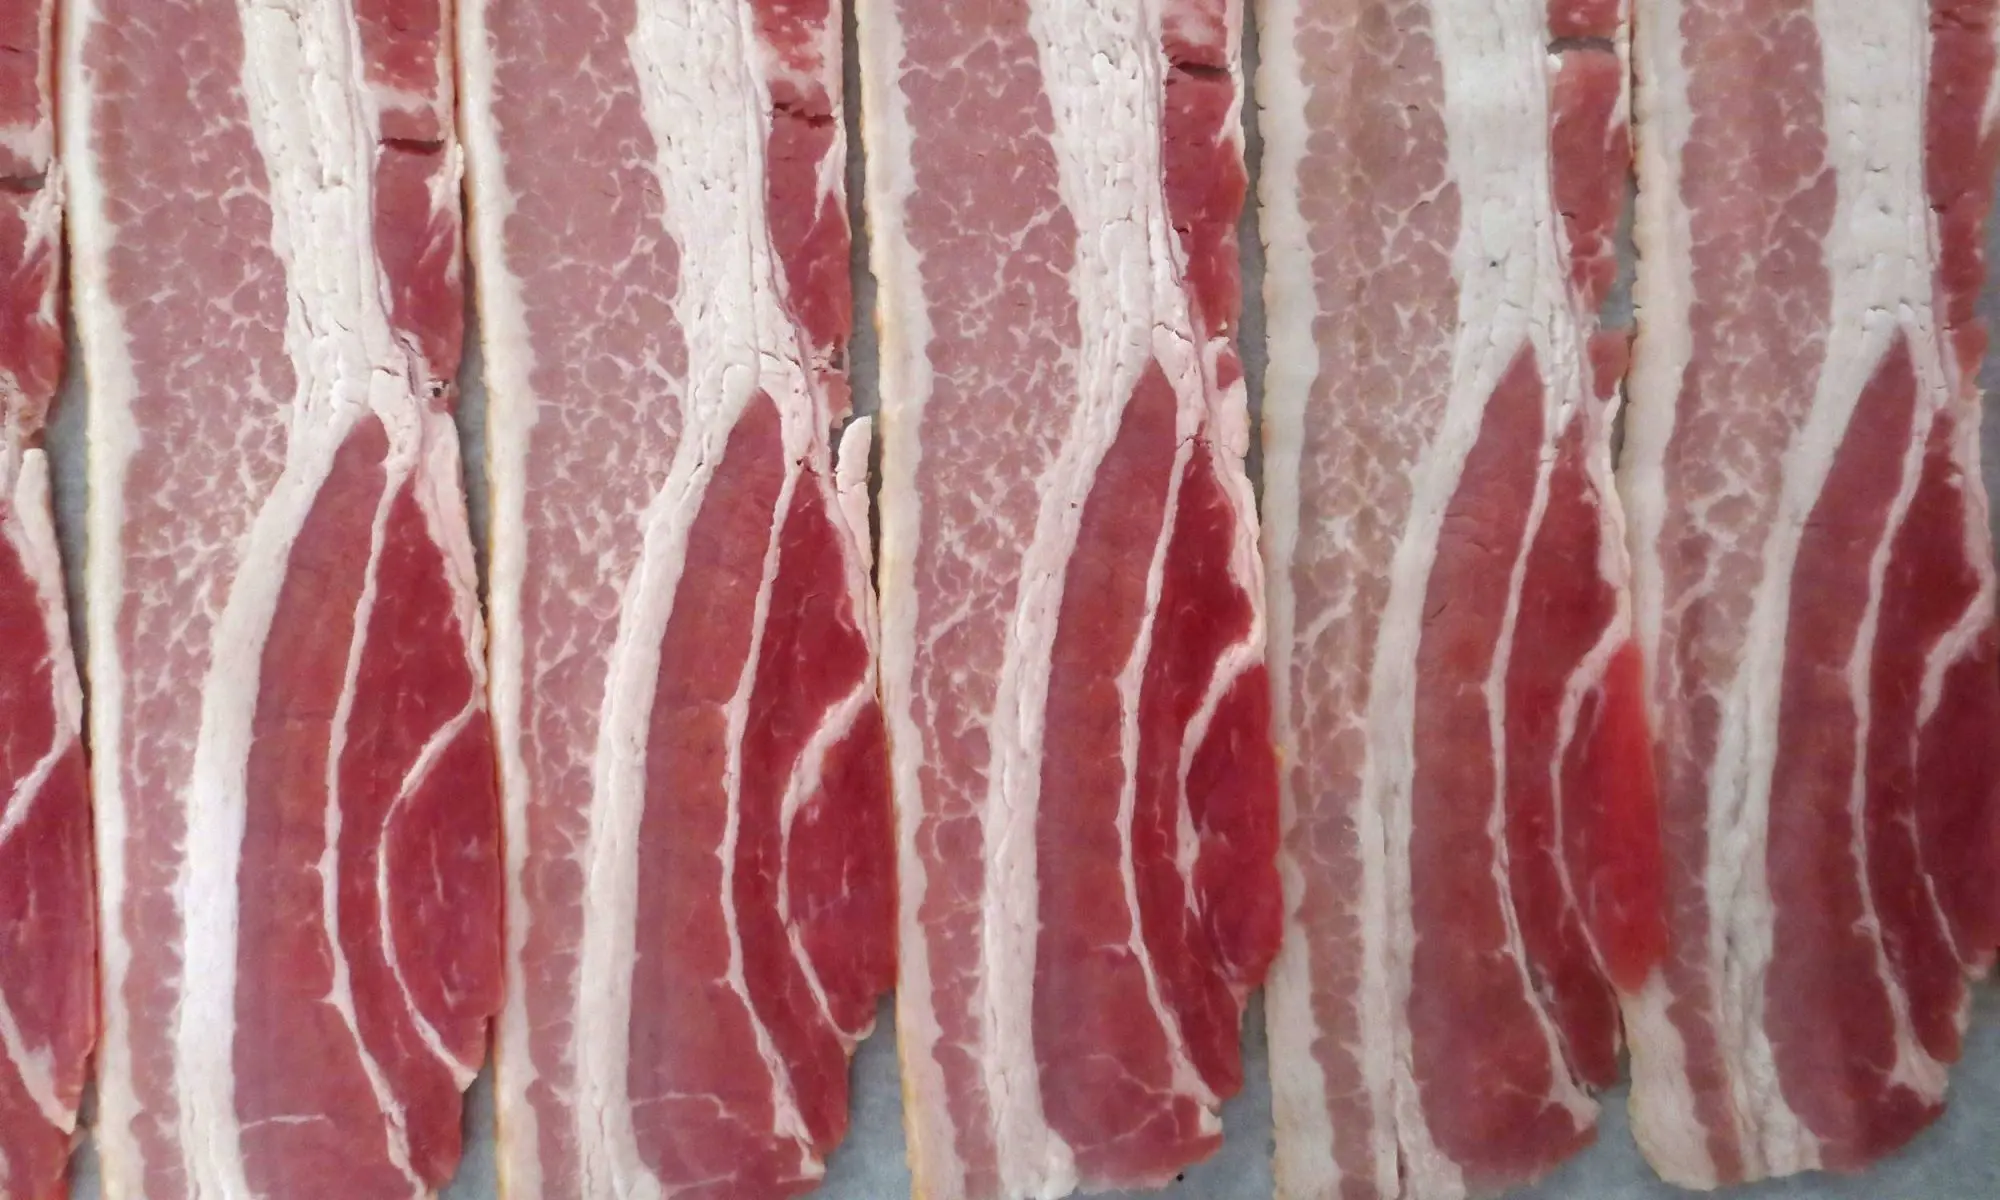 eating raw smoked bacon - What to do if you ate raw bacon